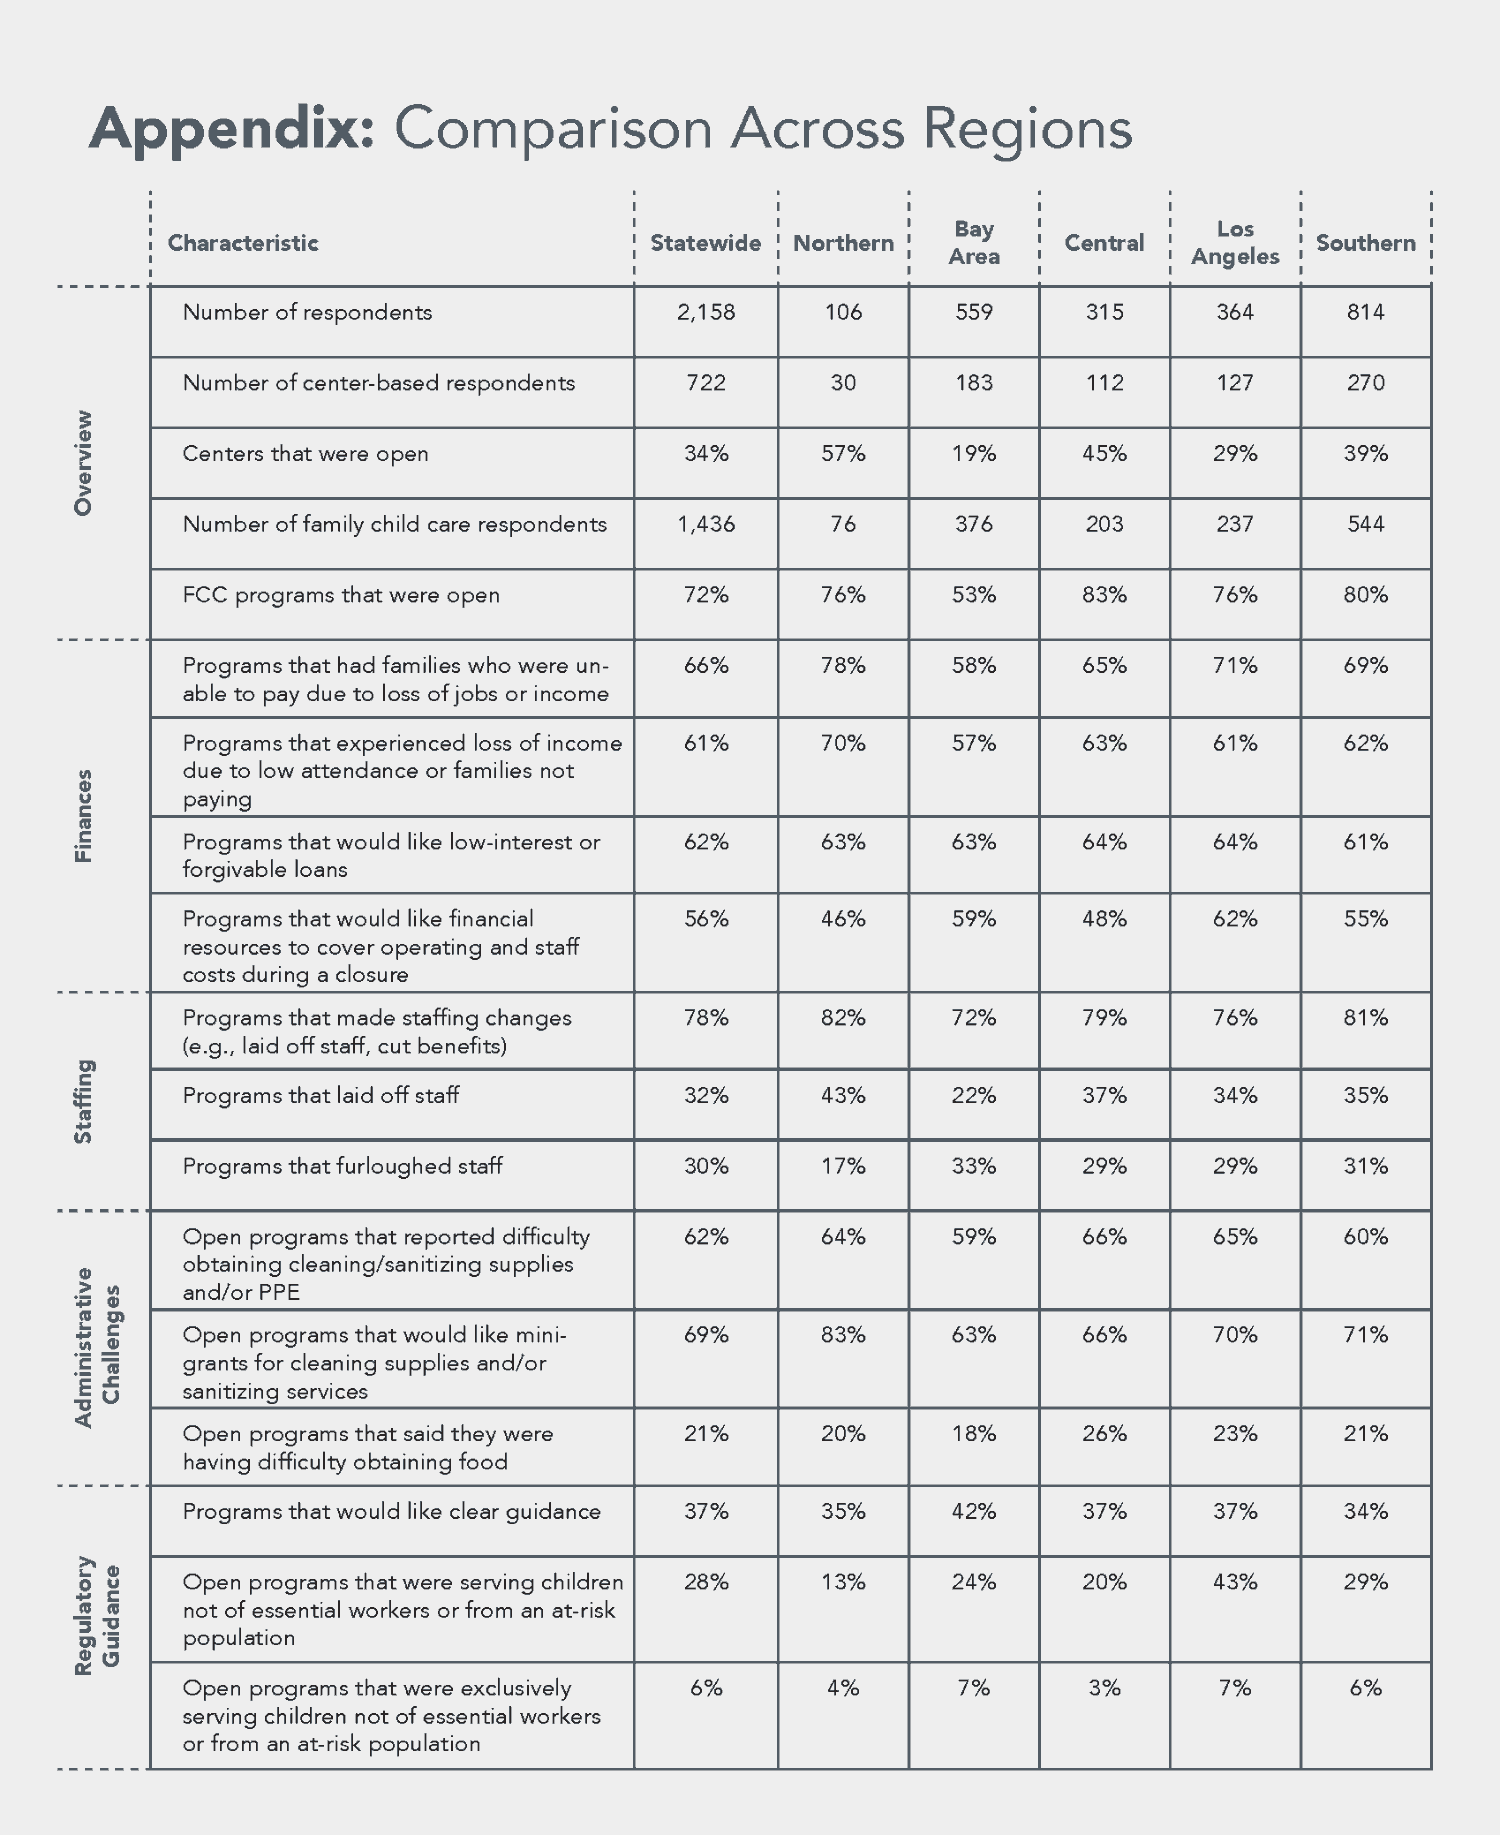 Table comparing characteristics like finances, staffing, administrative challenges, and regulatory guidance across California regions